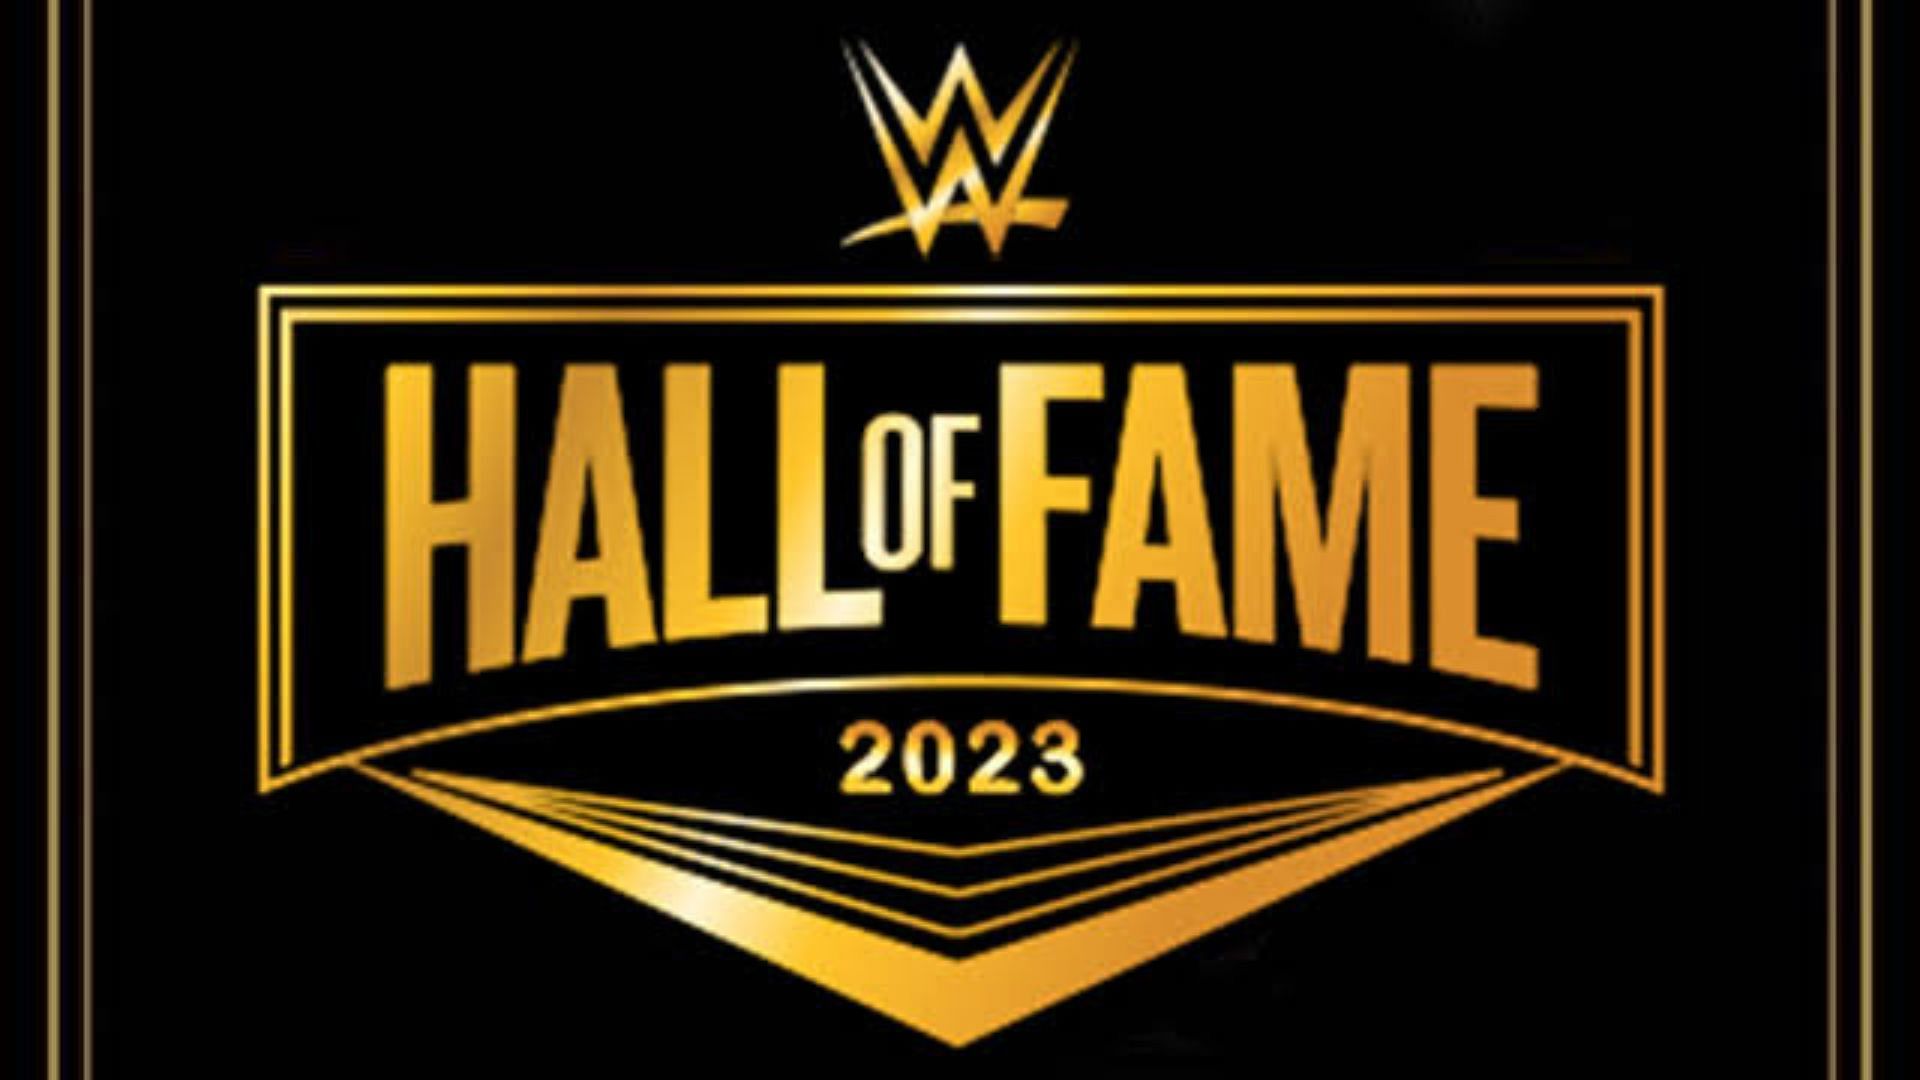 WWE Hall of Fame 2023 currently has three veterans